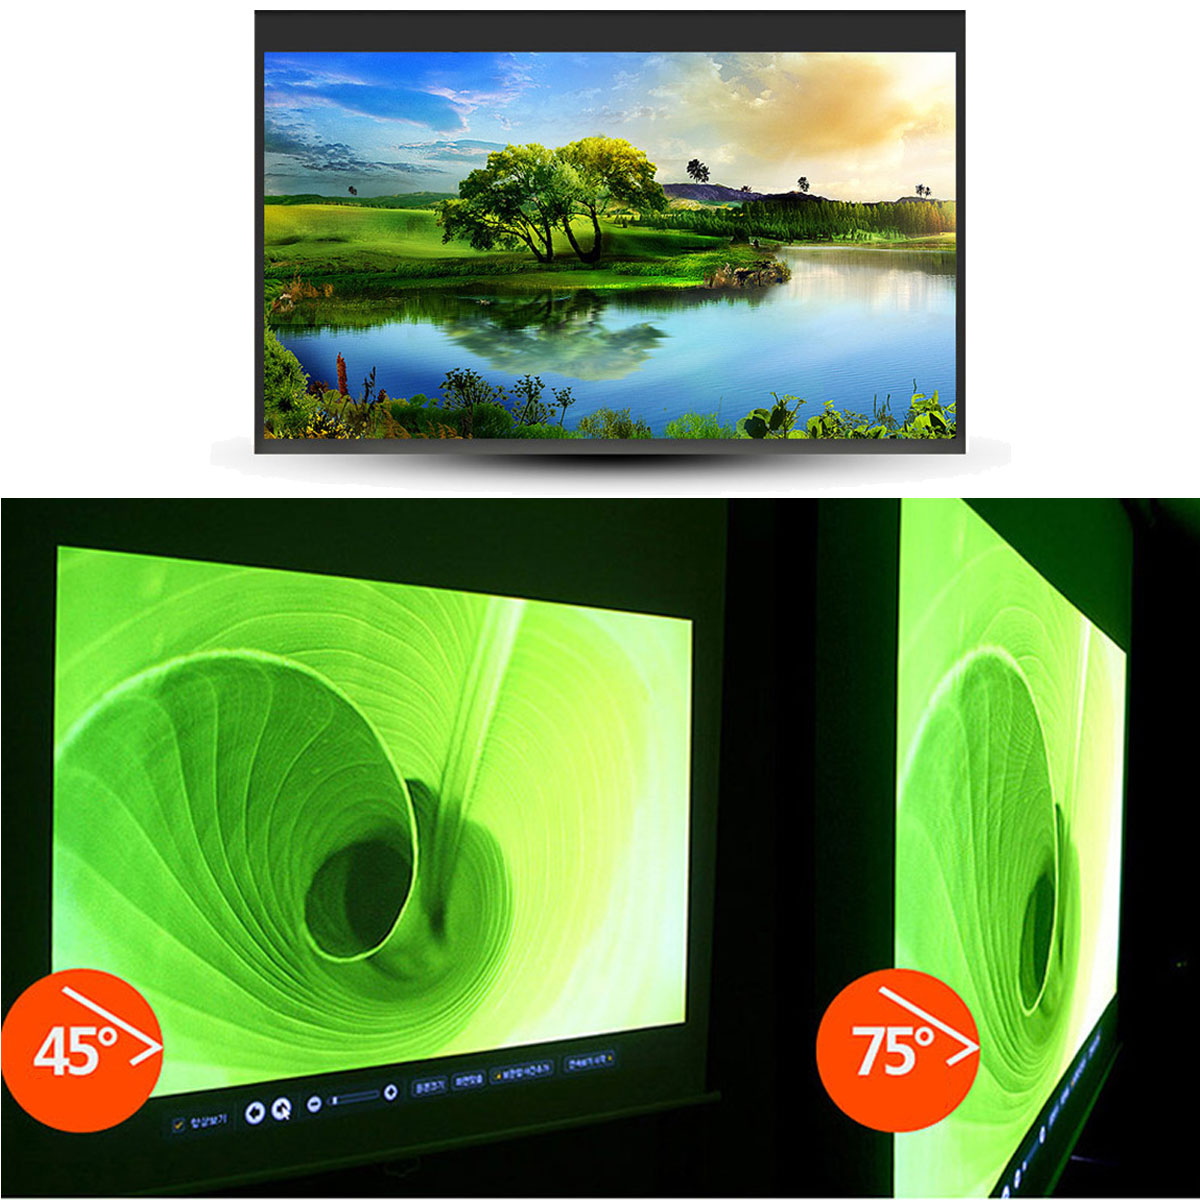 180-Inch-169-Portable-Fibre-Projector-Screen-Home-Theater-Office-Work-Outdoor-Movie-Projection-1301037